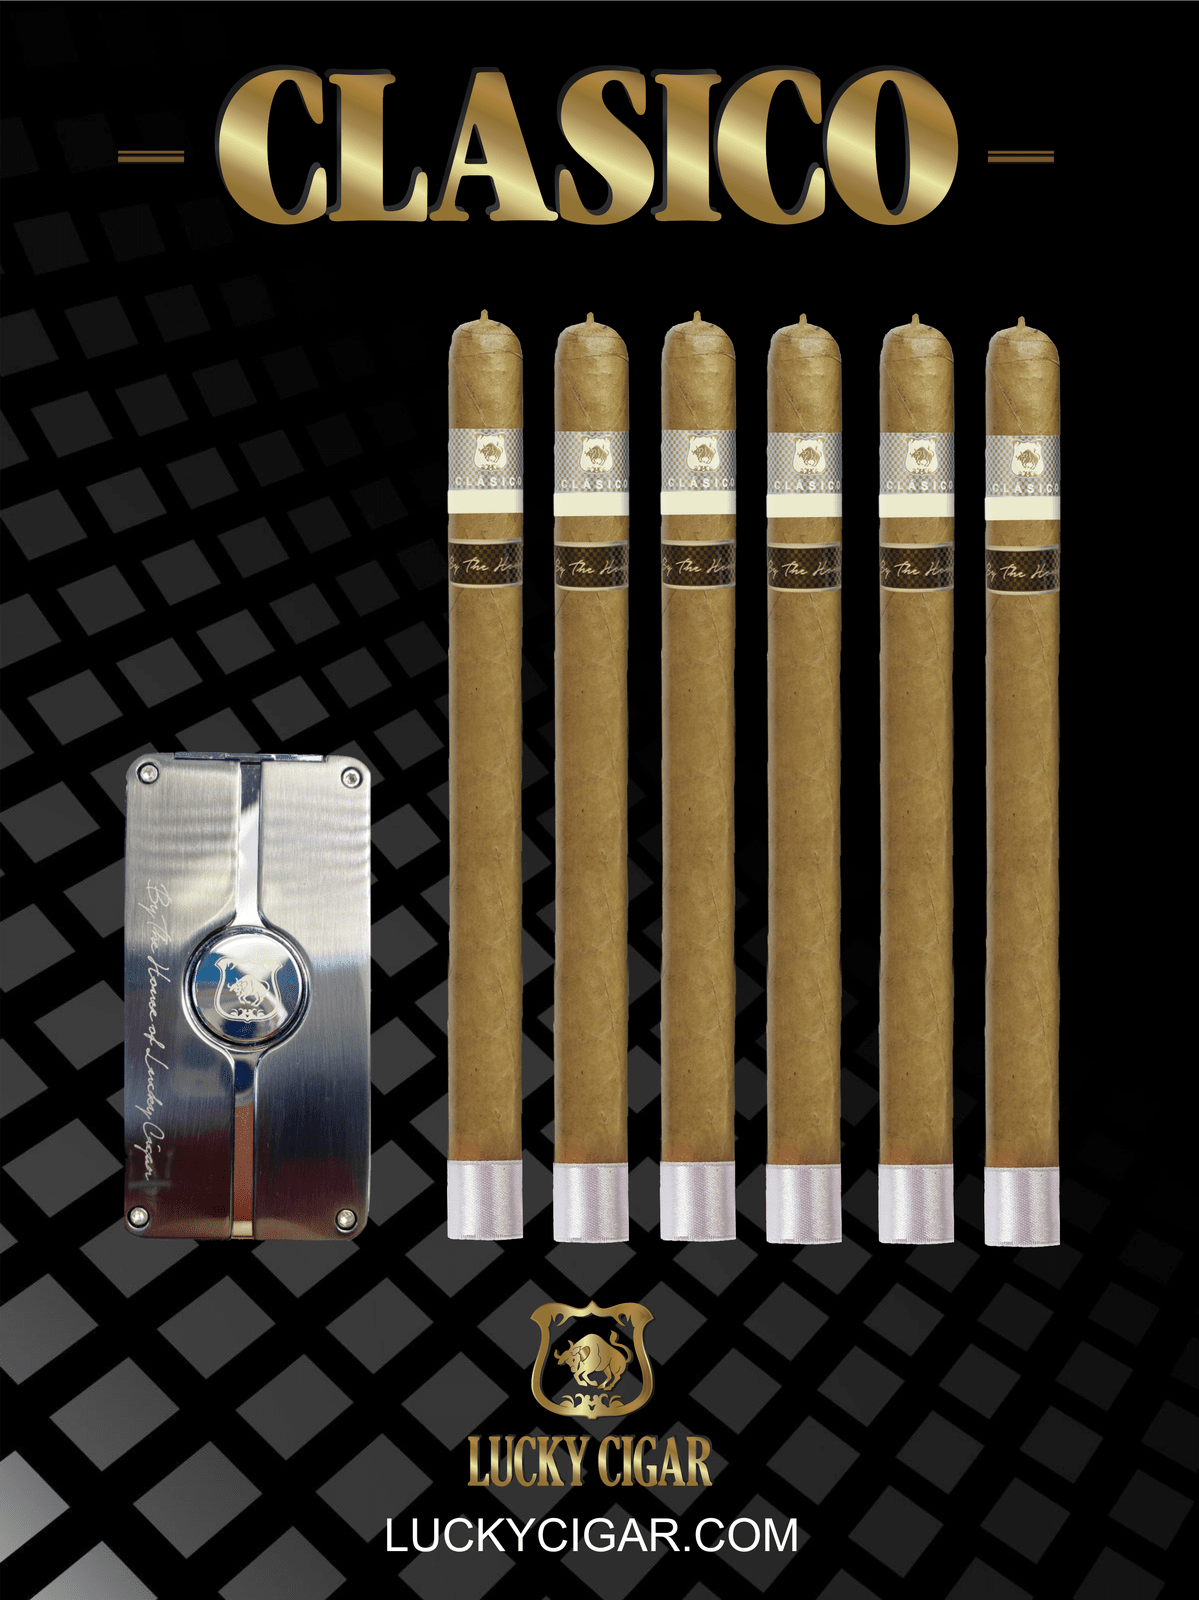 Classic Cigars - Classico by Lucky Cigar: Set of 6 Cigars Lancero with Lighter